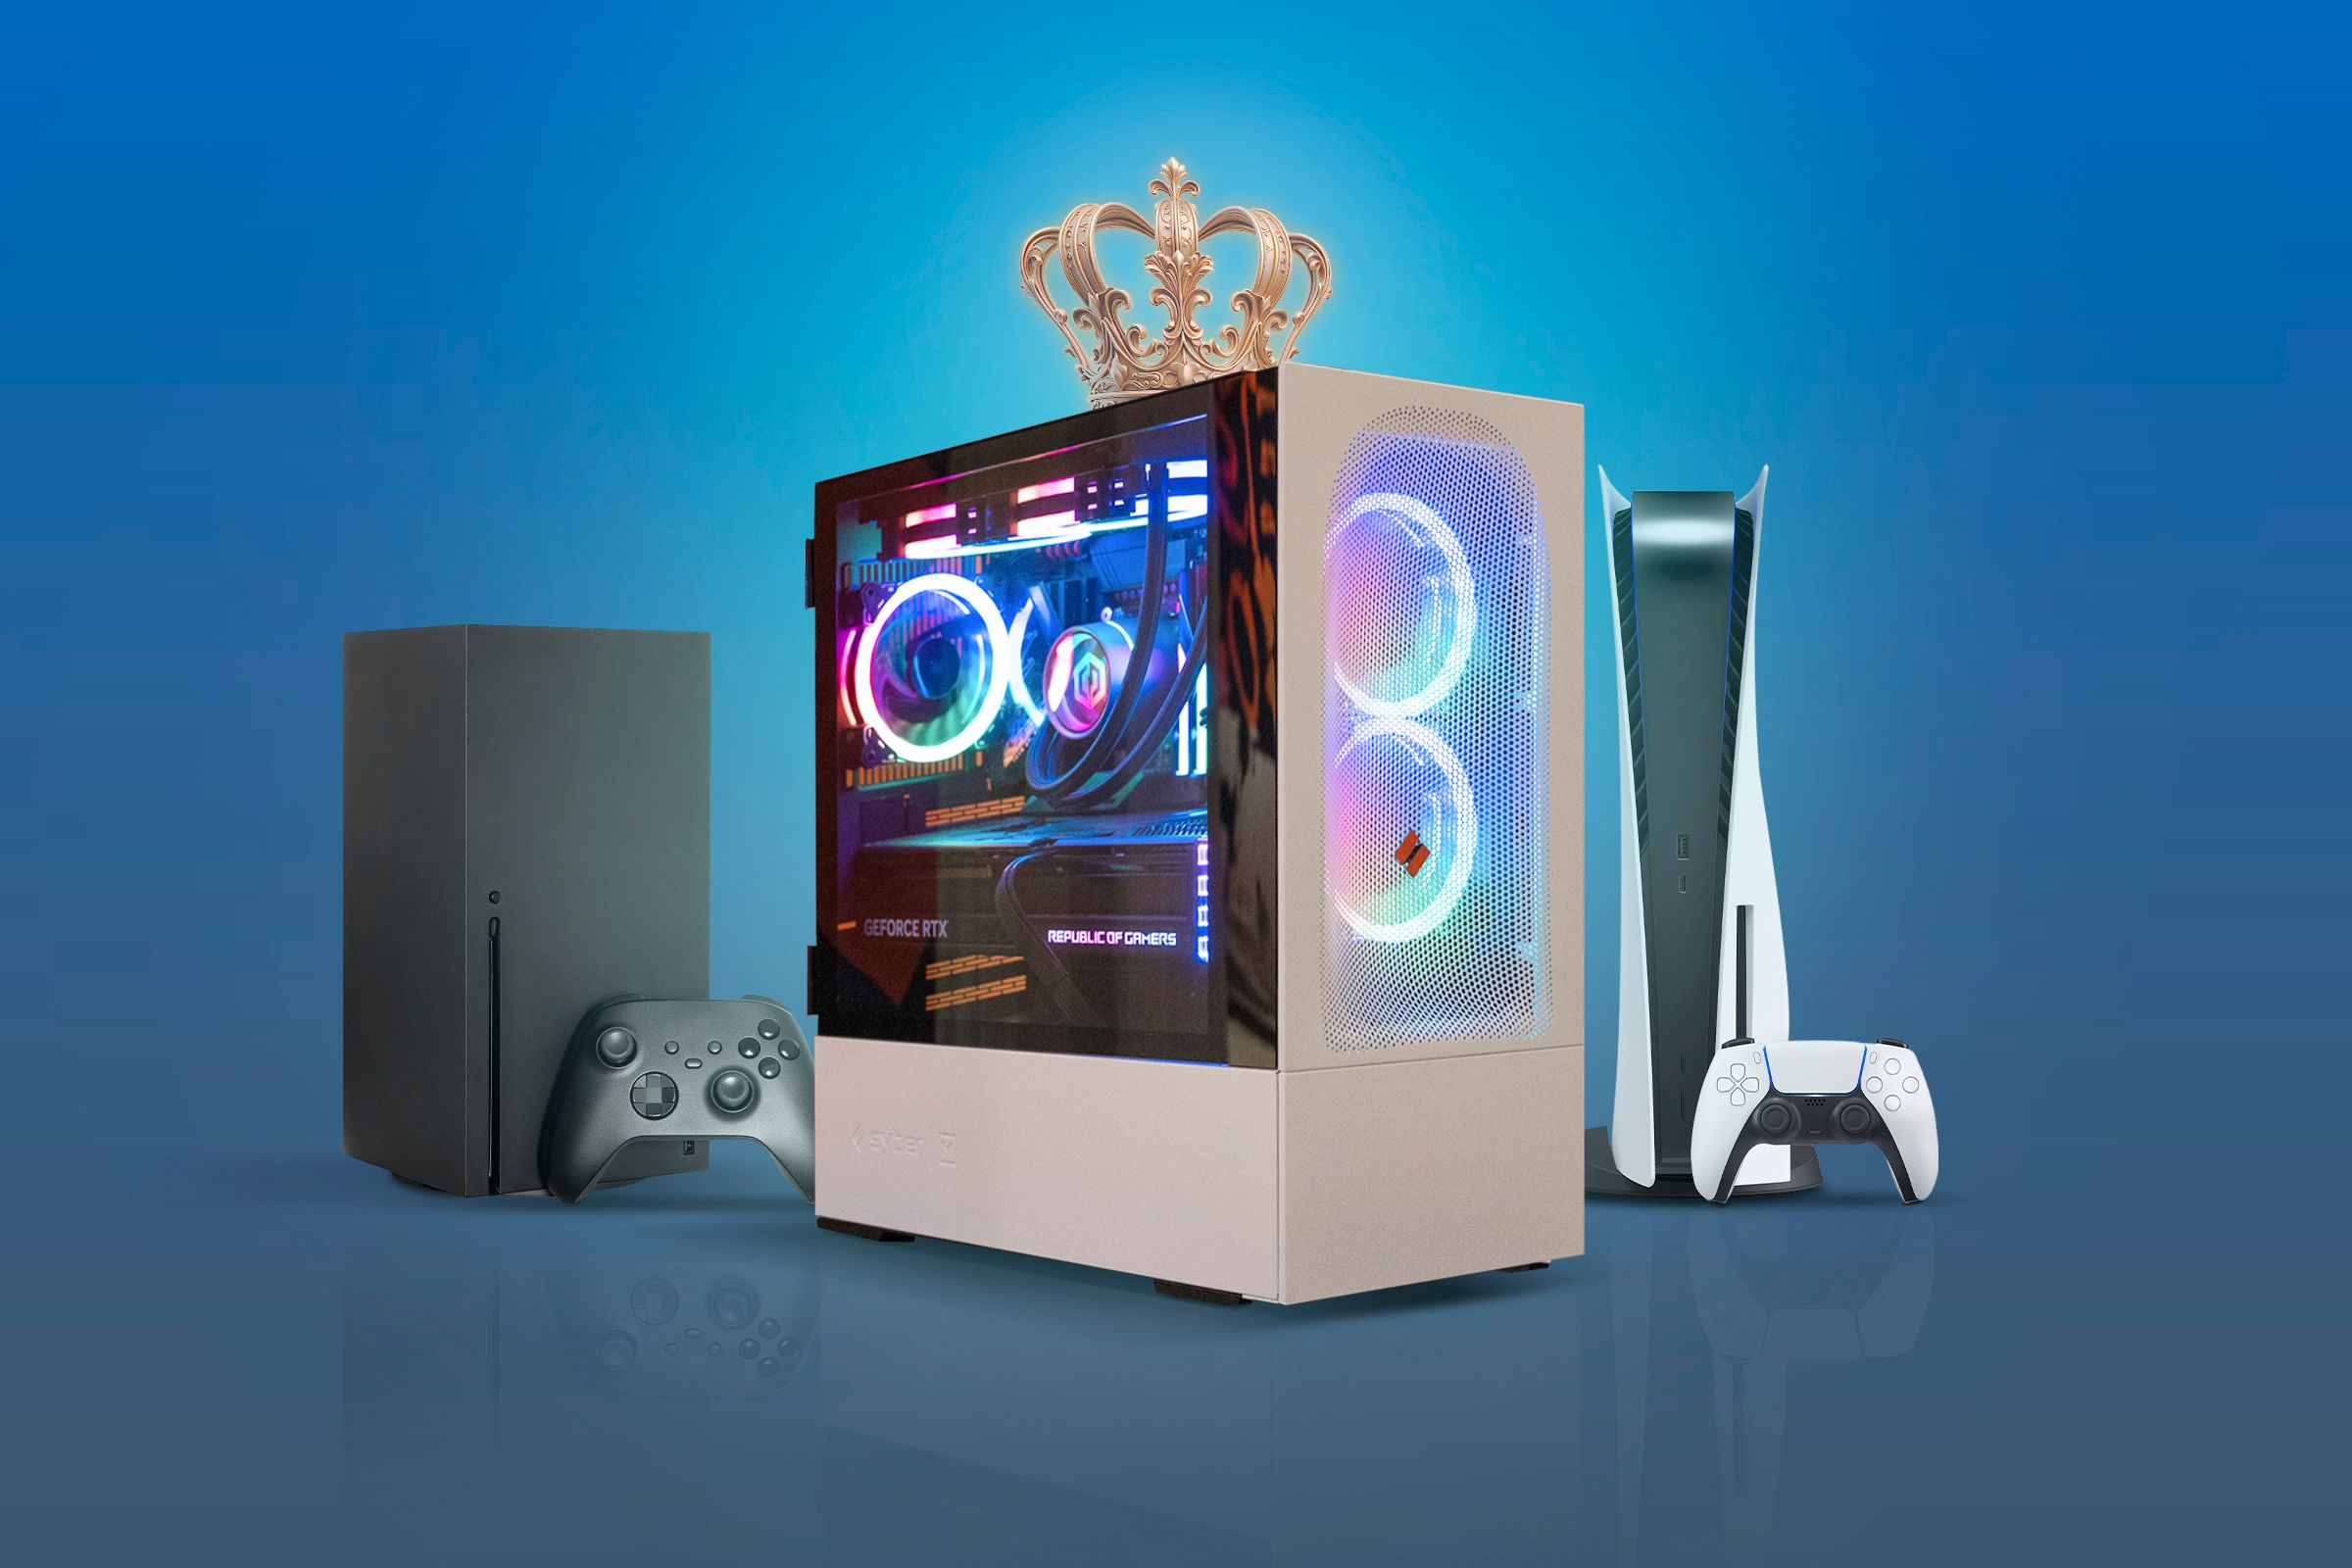 A gaming PC with a crown, representing superiority, and an Xbox Series X and a PS5 in the background.